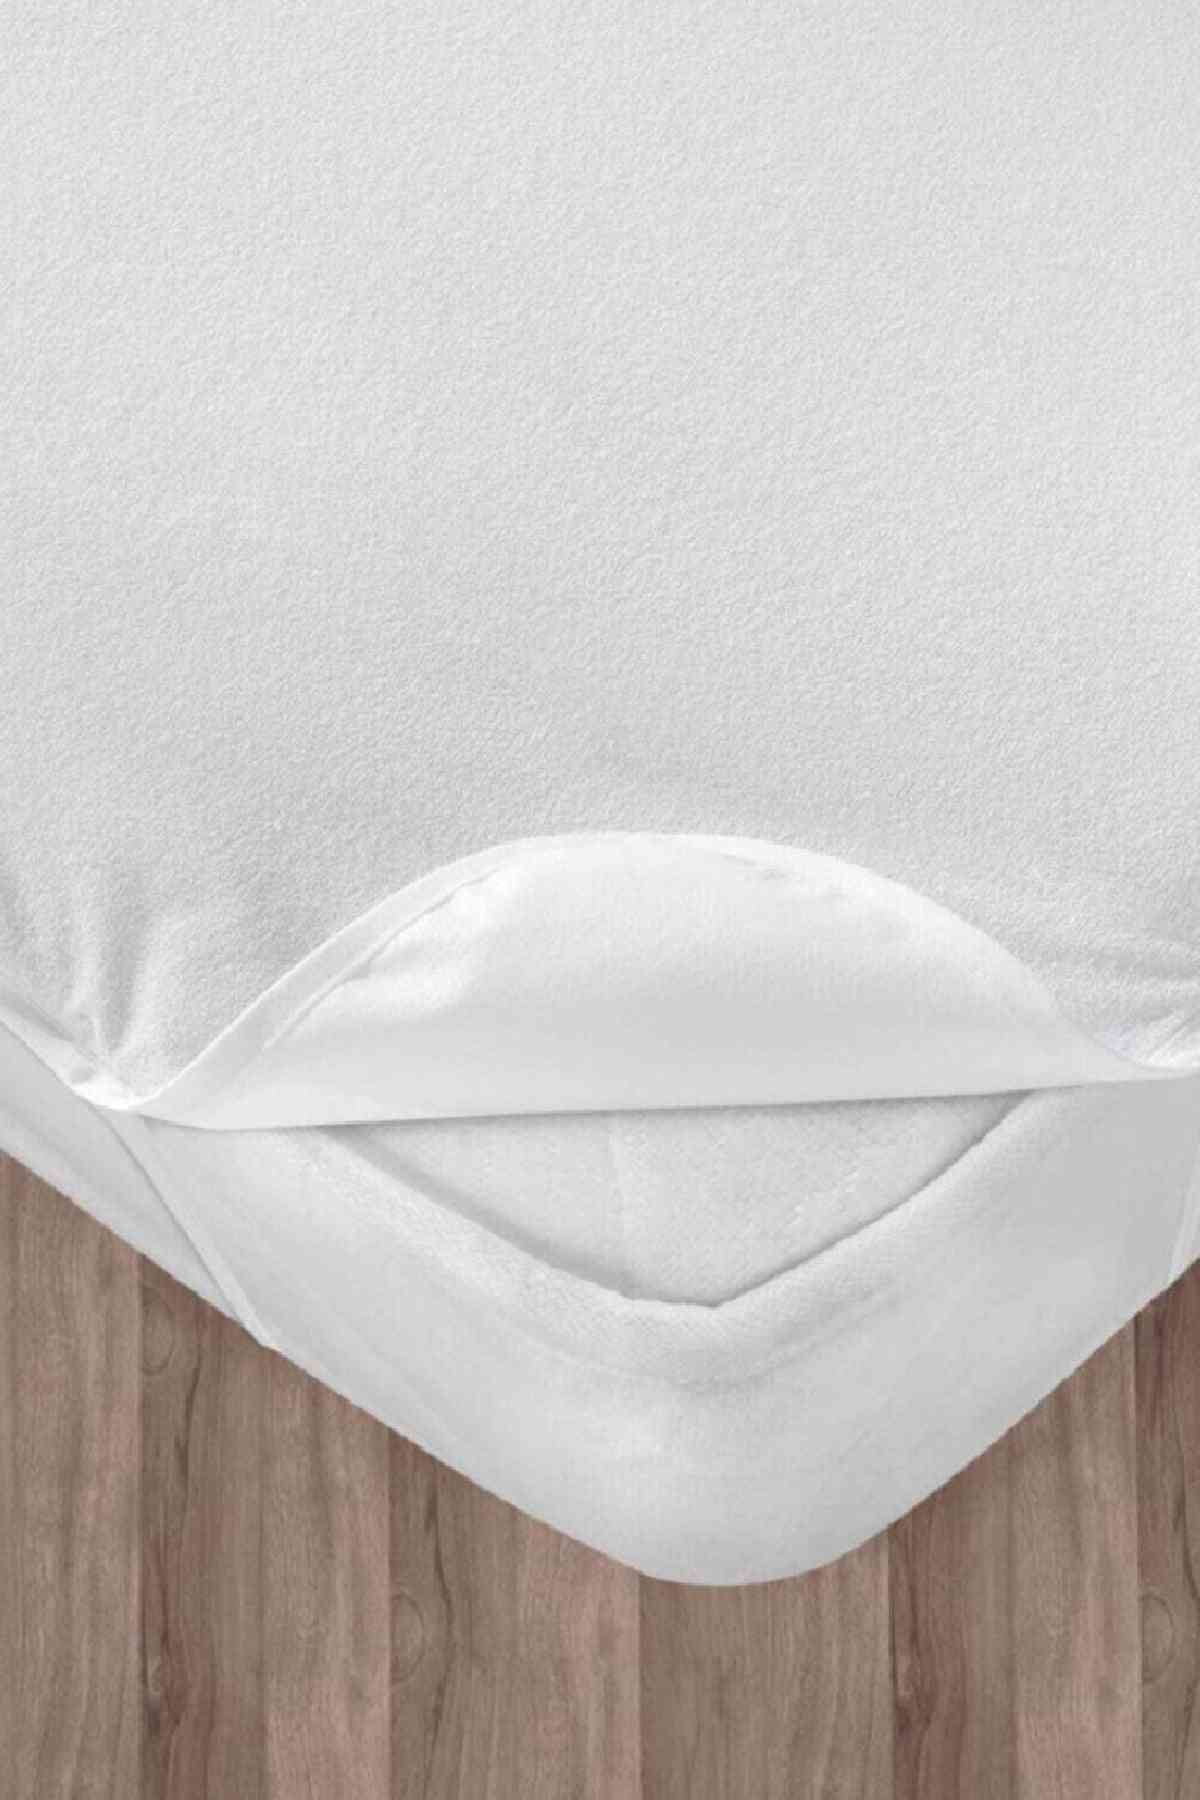 Baby Cot Crib Bed Linen Mattress Protector, Fitted Sheet Corner Elastic